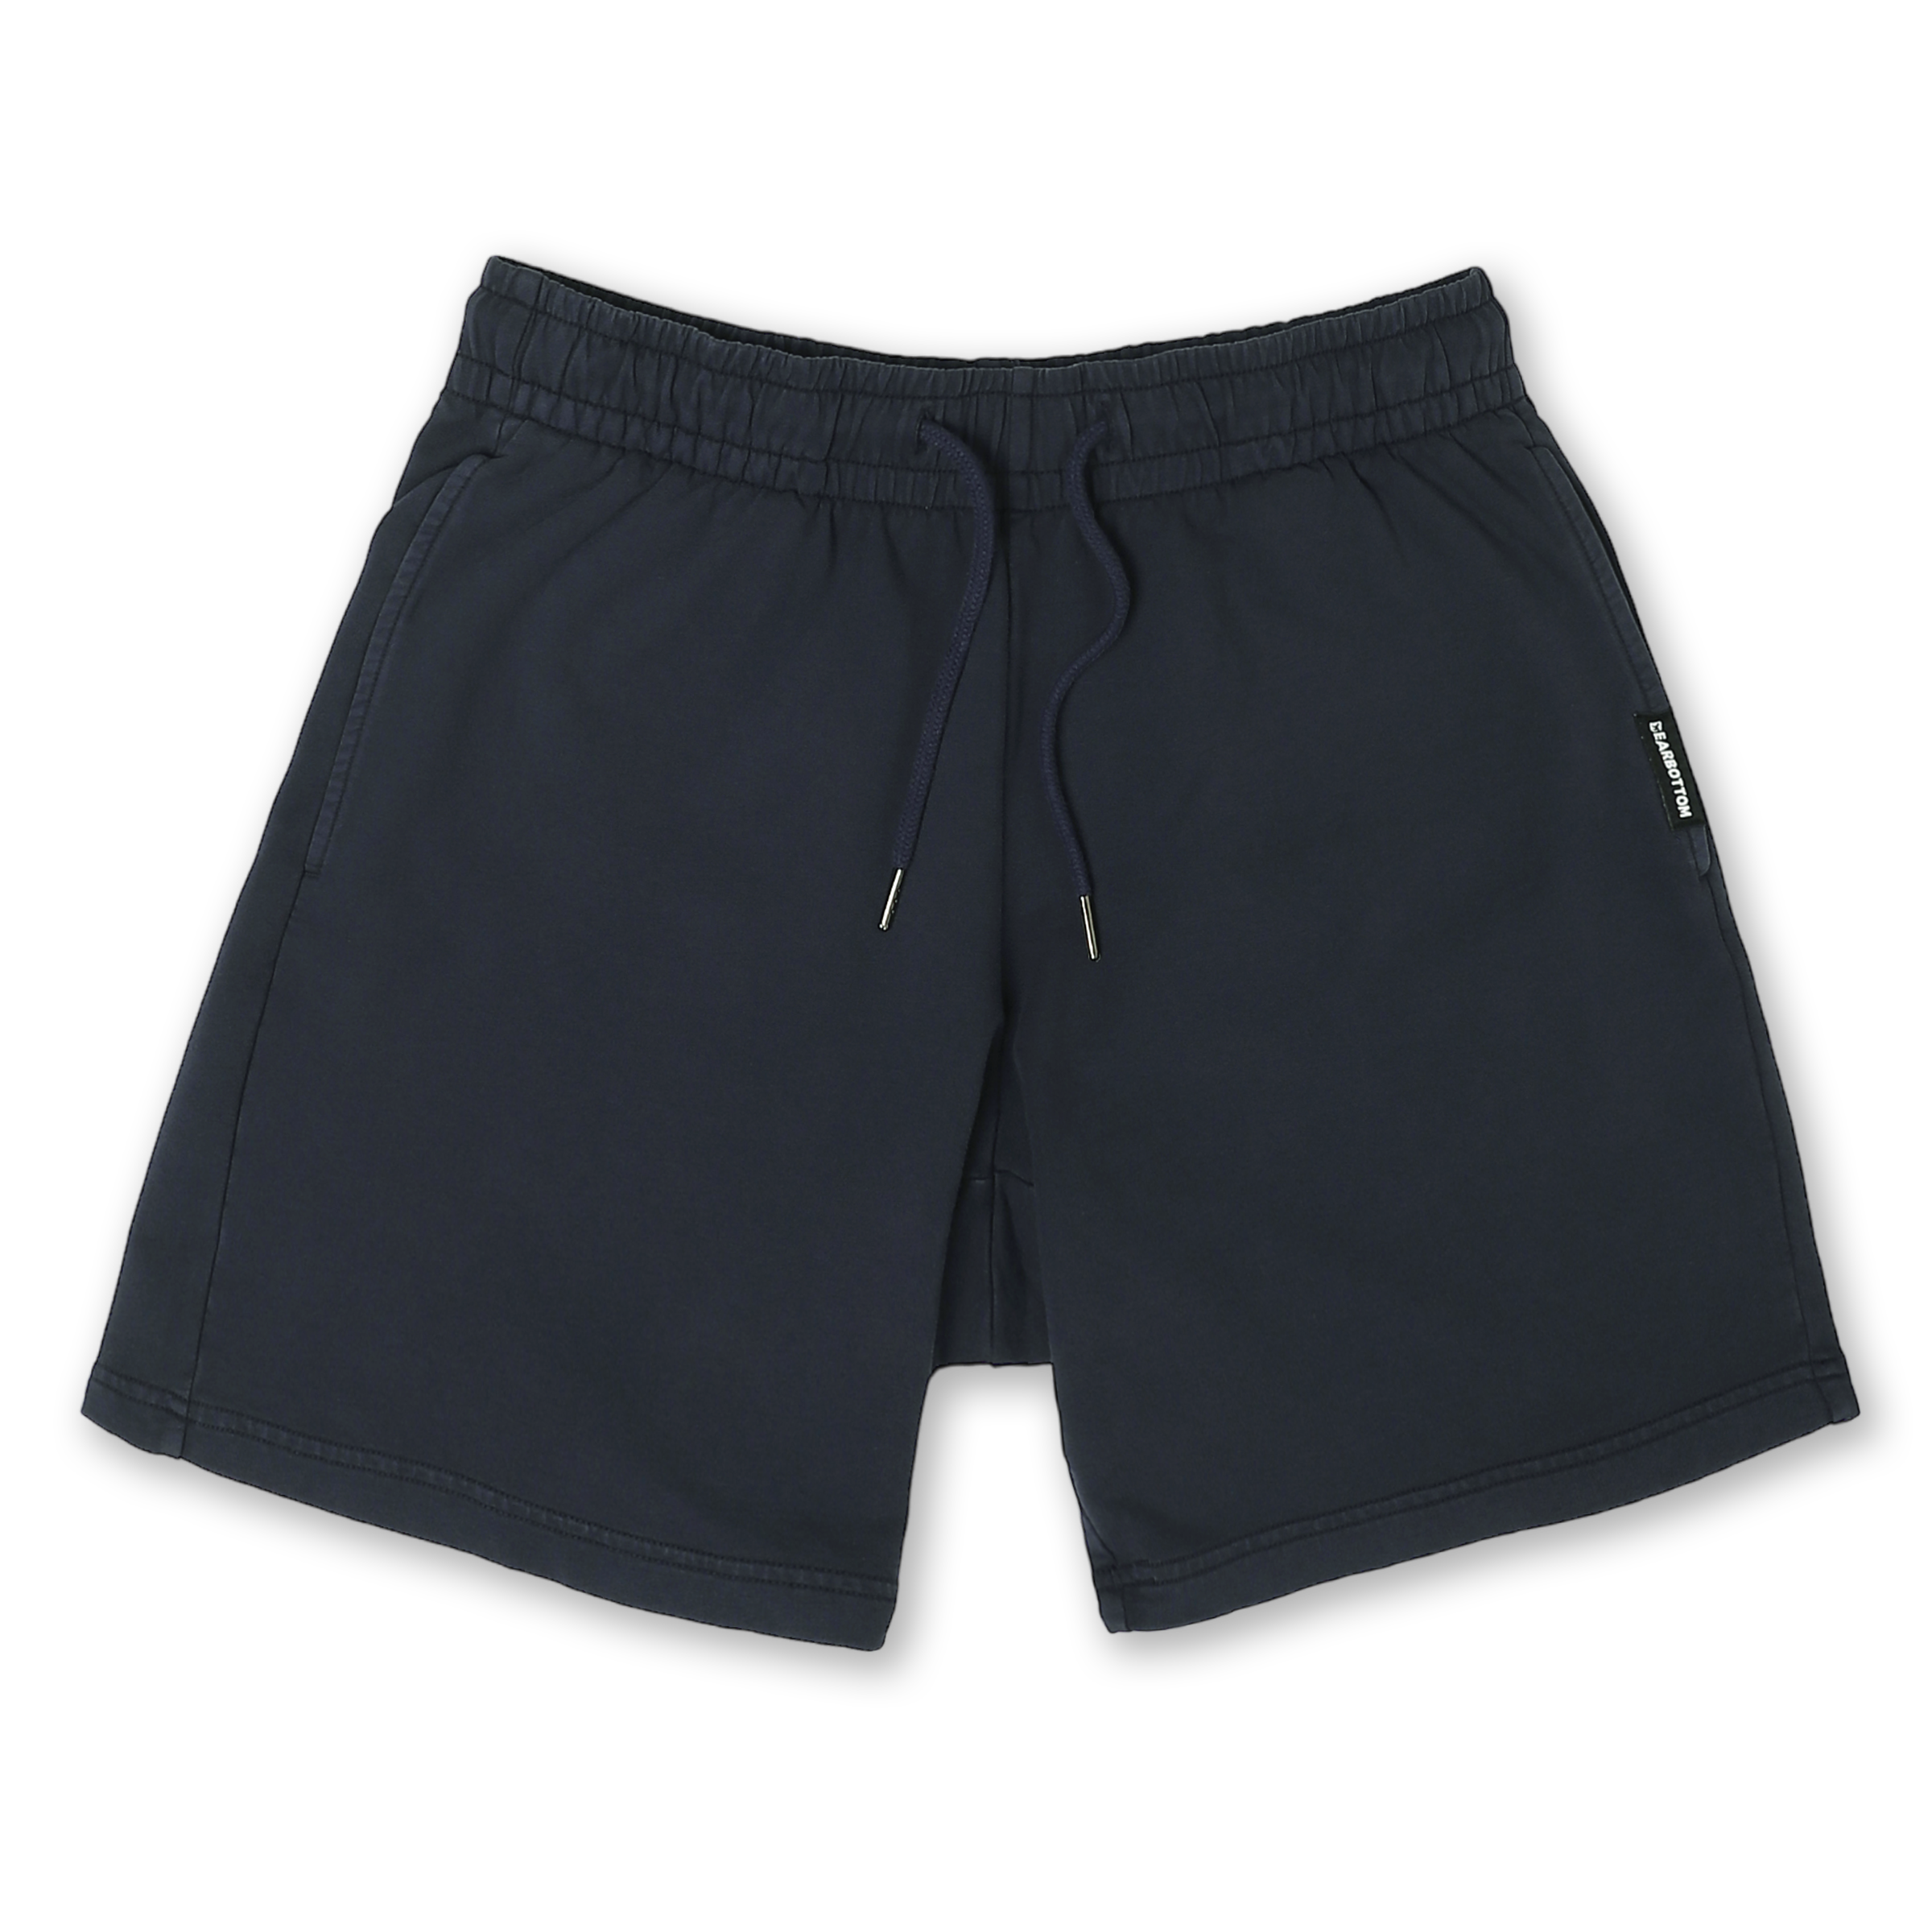 Loft Short 7" Navy front with elastic waistband, fabric drawstring with metal tips, and two inseam pockets